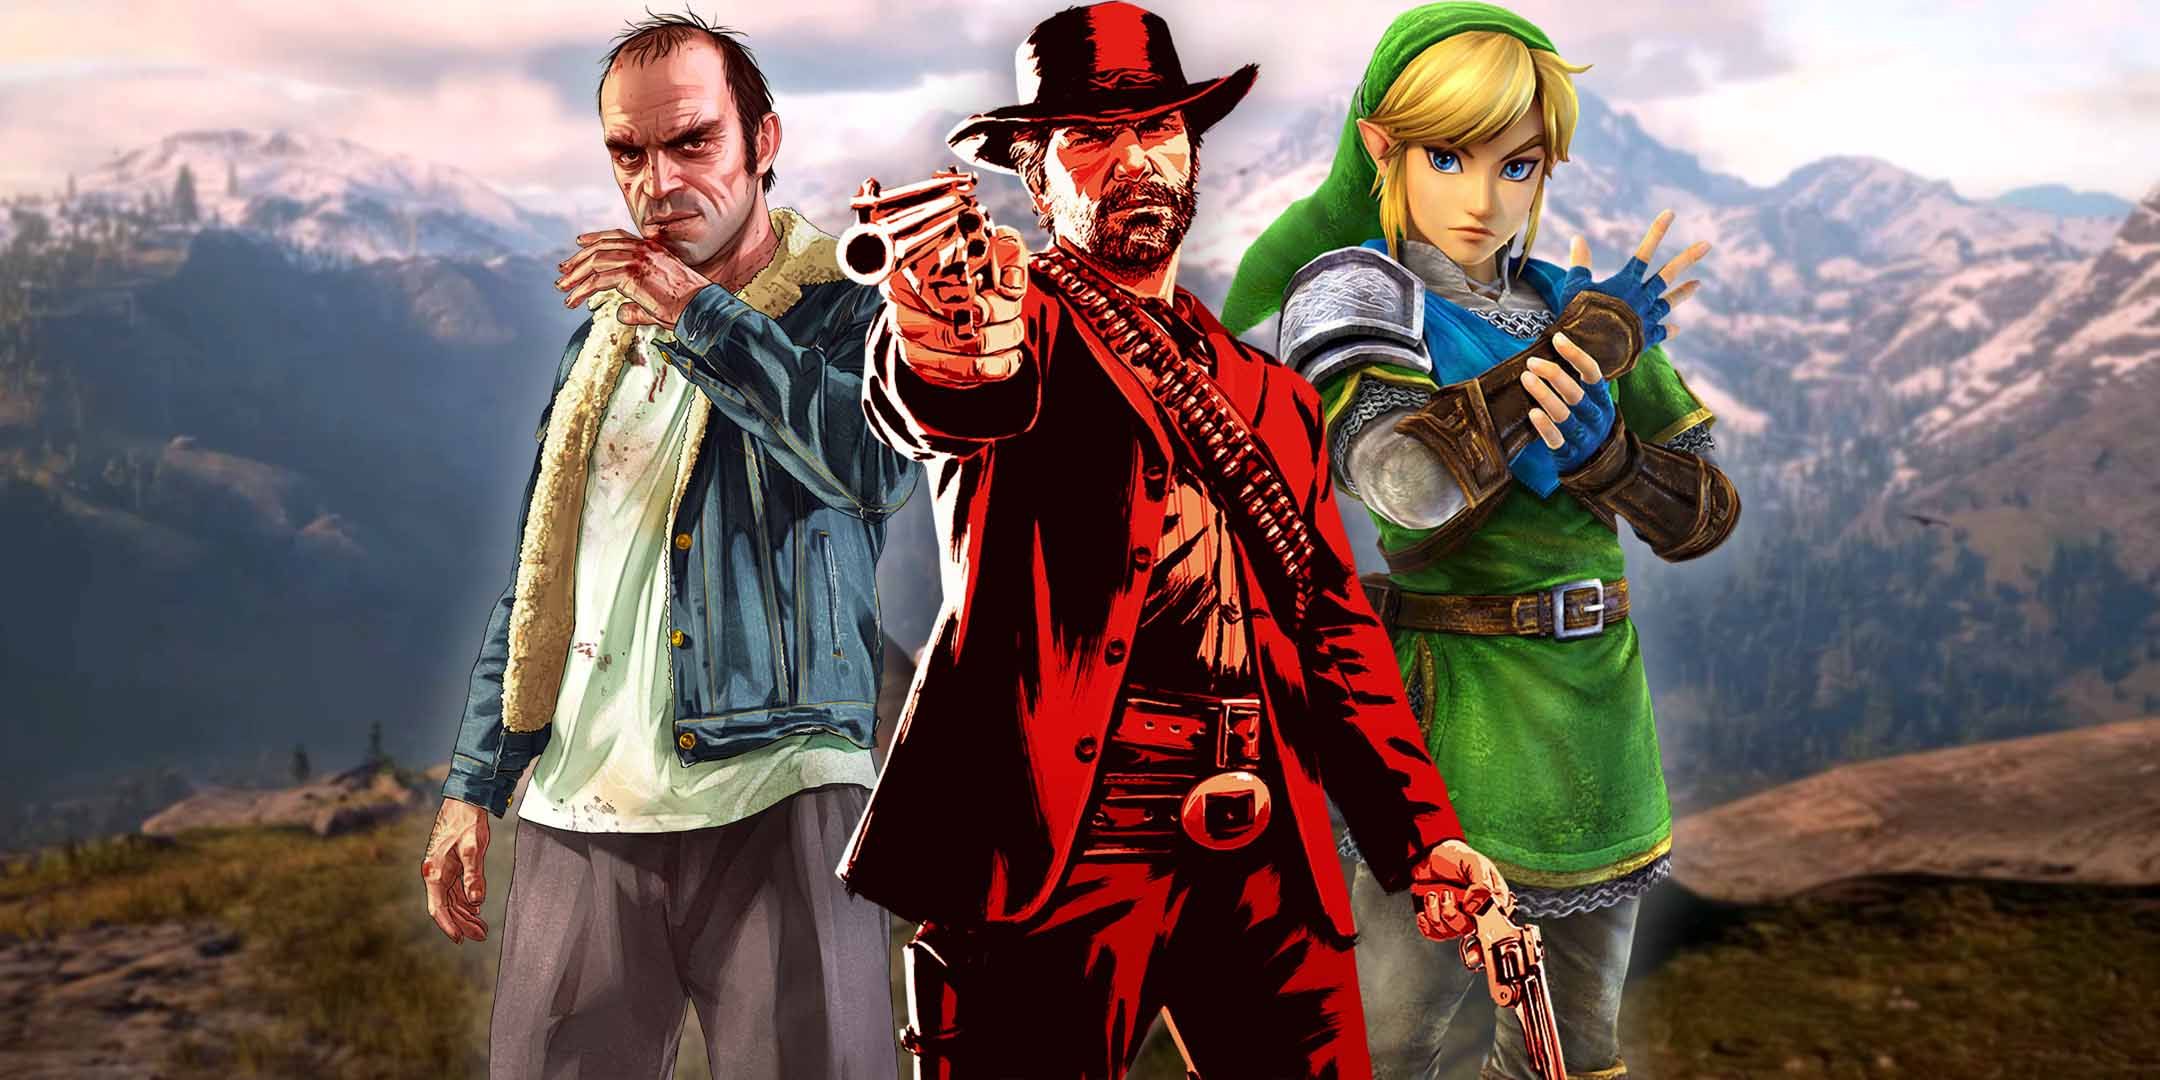 Cover art from Grand Theft Auto 5, Red dead Redemption, and Legend of Zelda